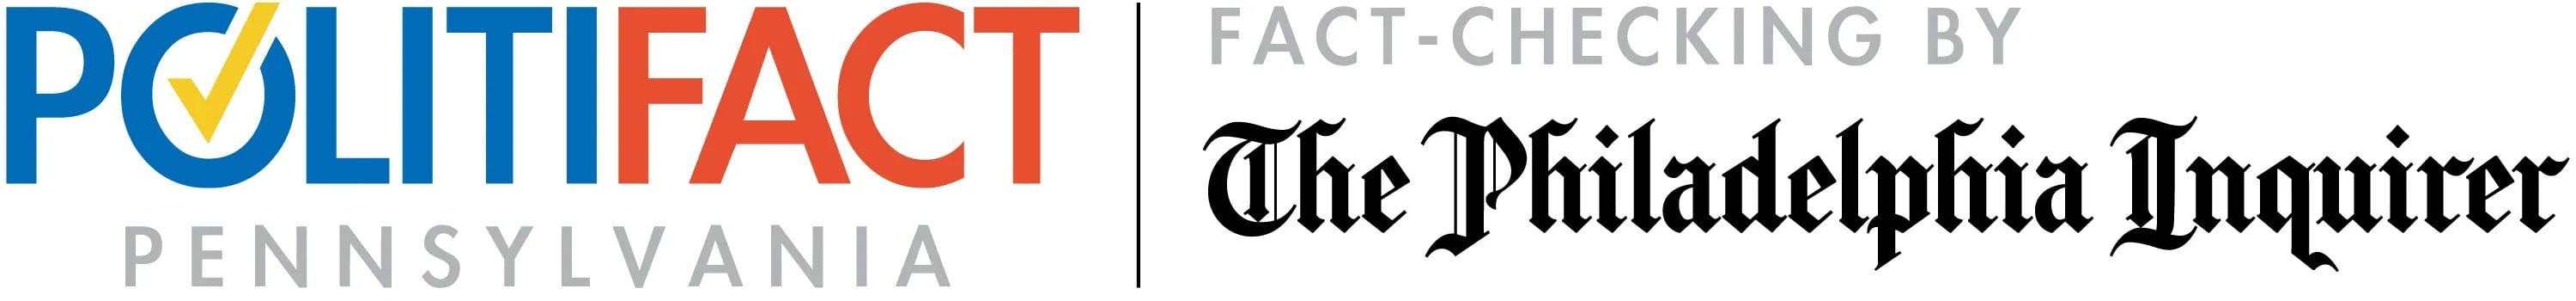 PolitiFact Pennsylvania, in partnership with the Philadelphia Inquirer